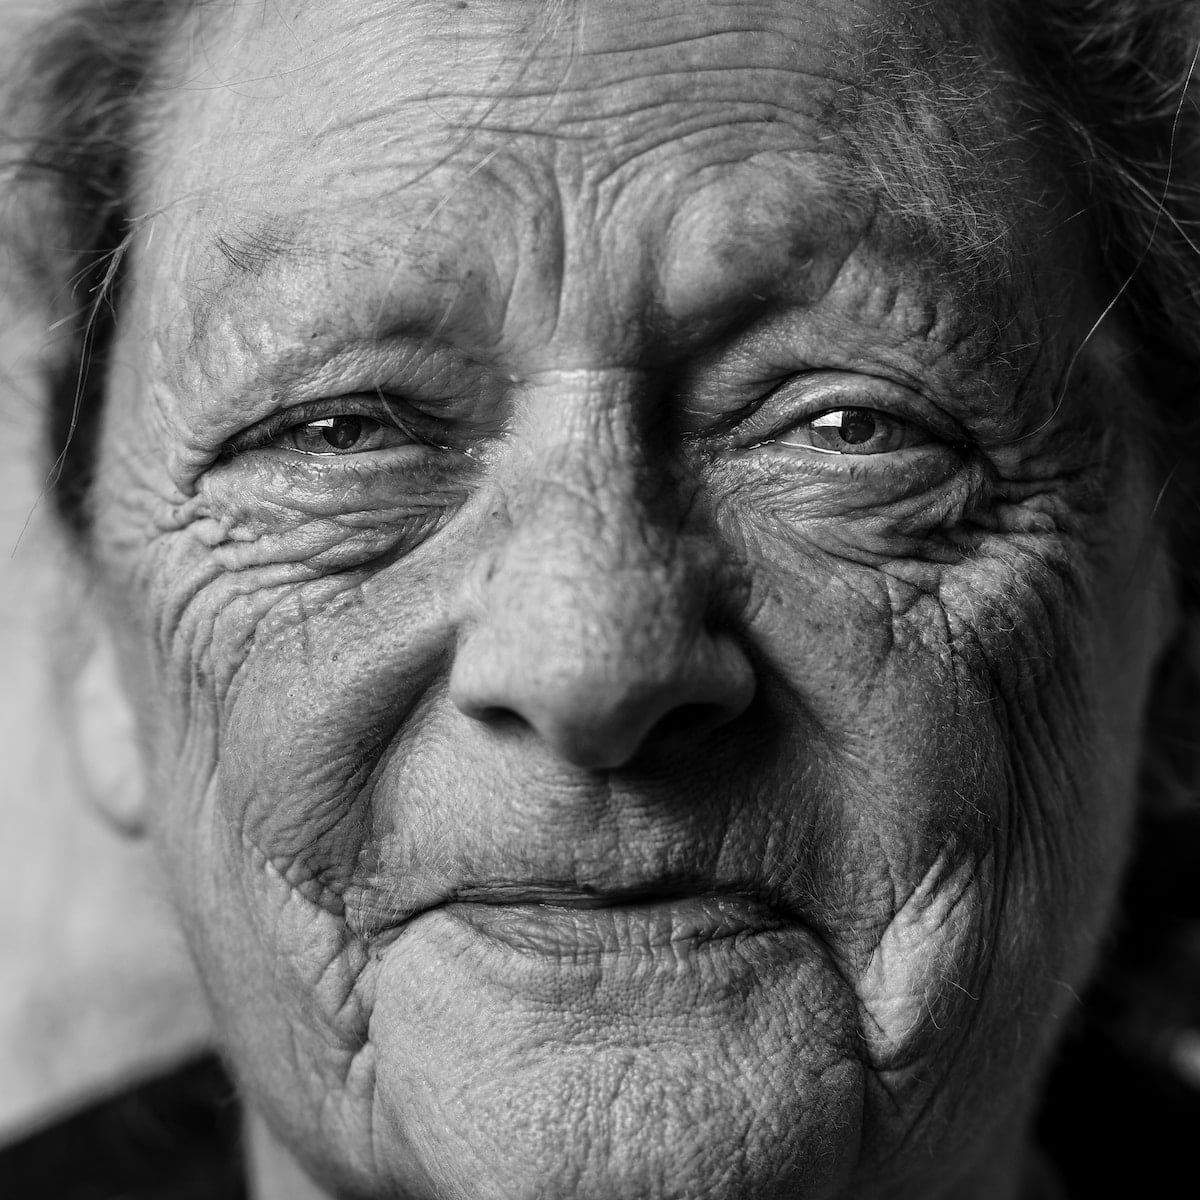 An old woman captured in a black and white photo.